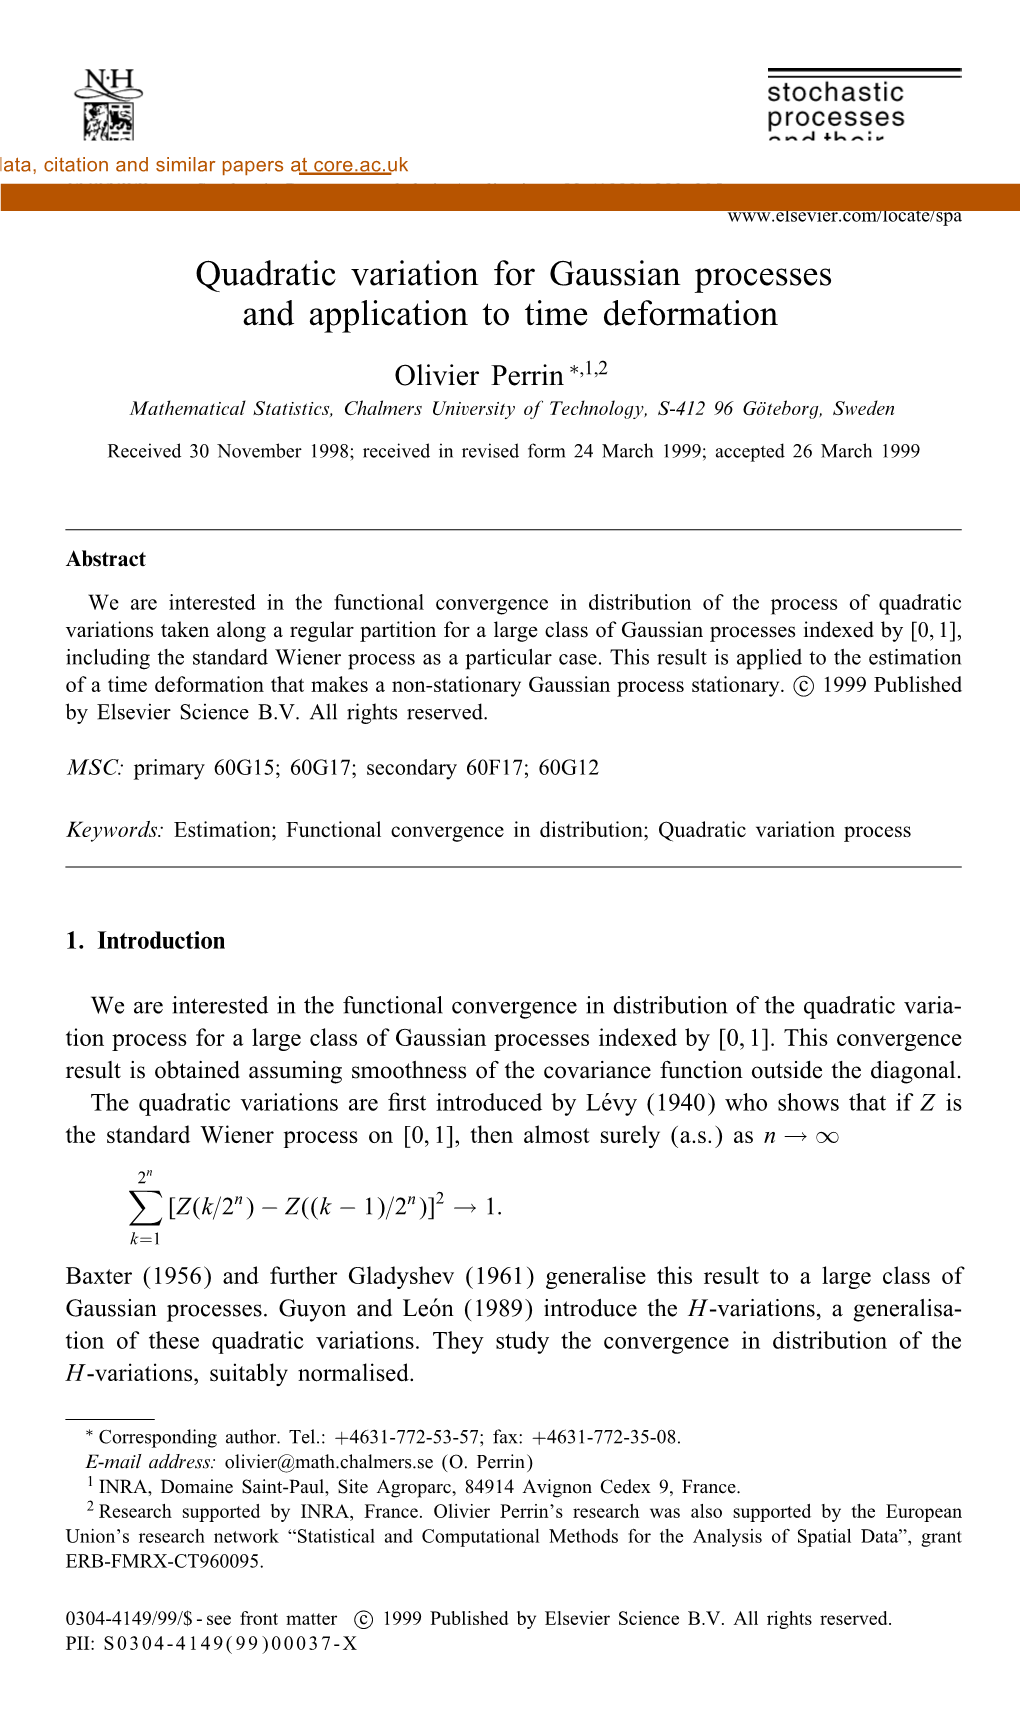 Quadratic Variation for Gaussian Processes and Application to Time Deformation